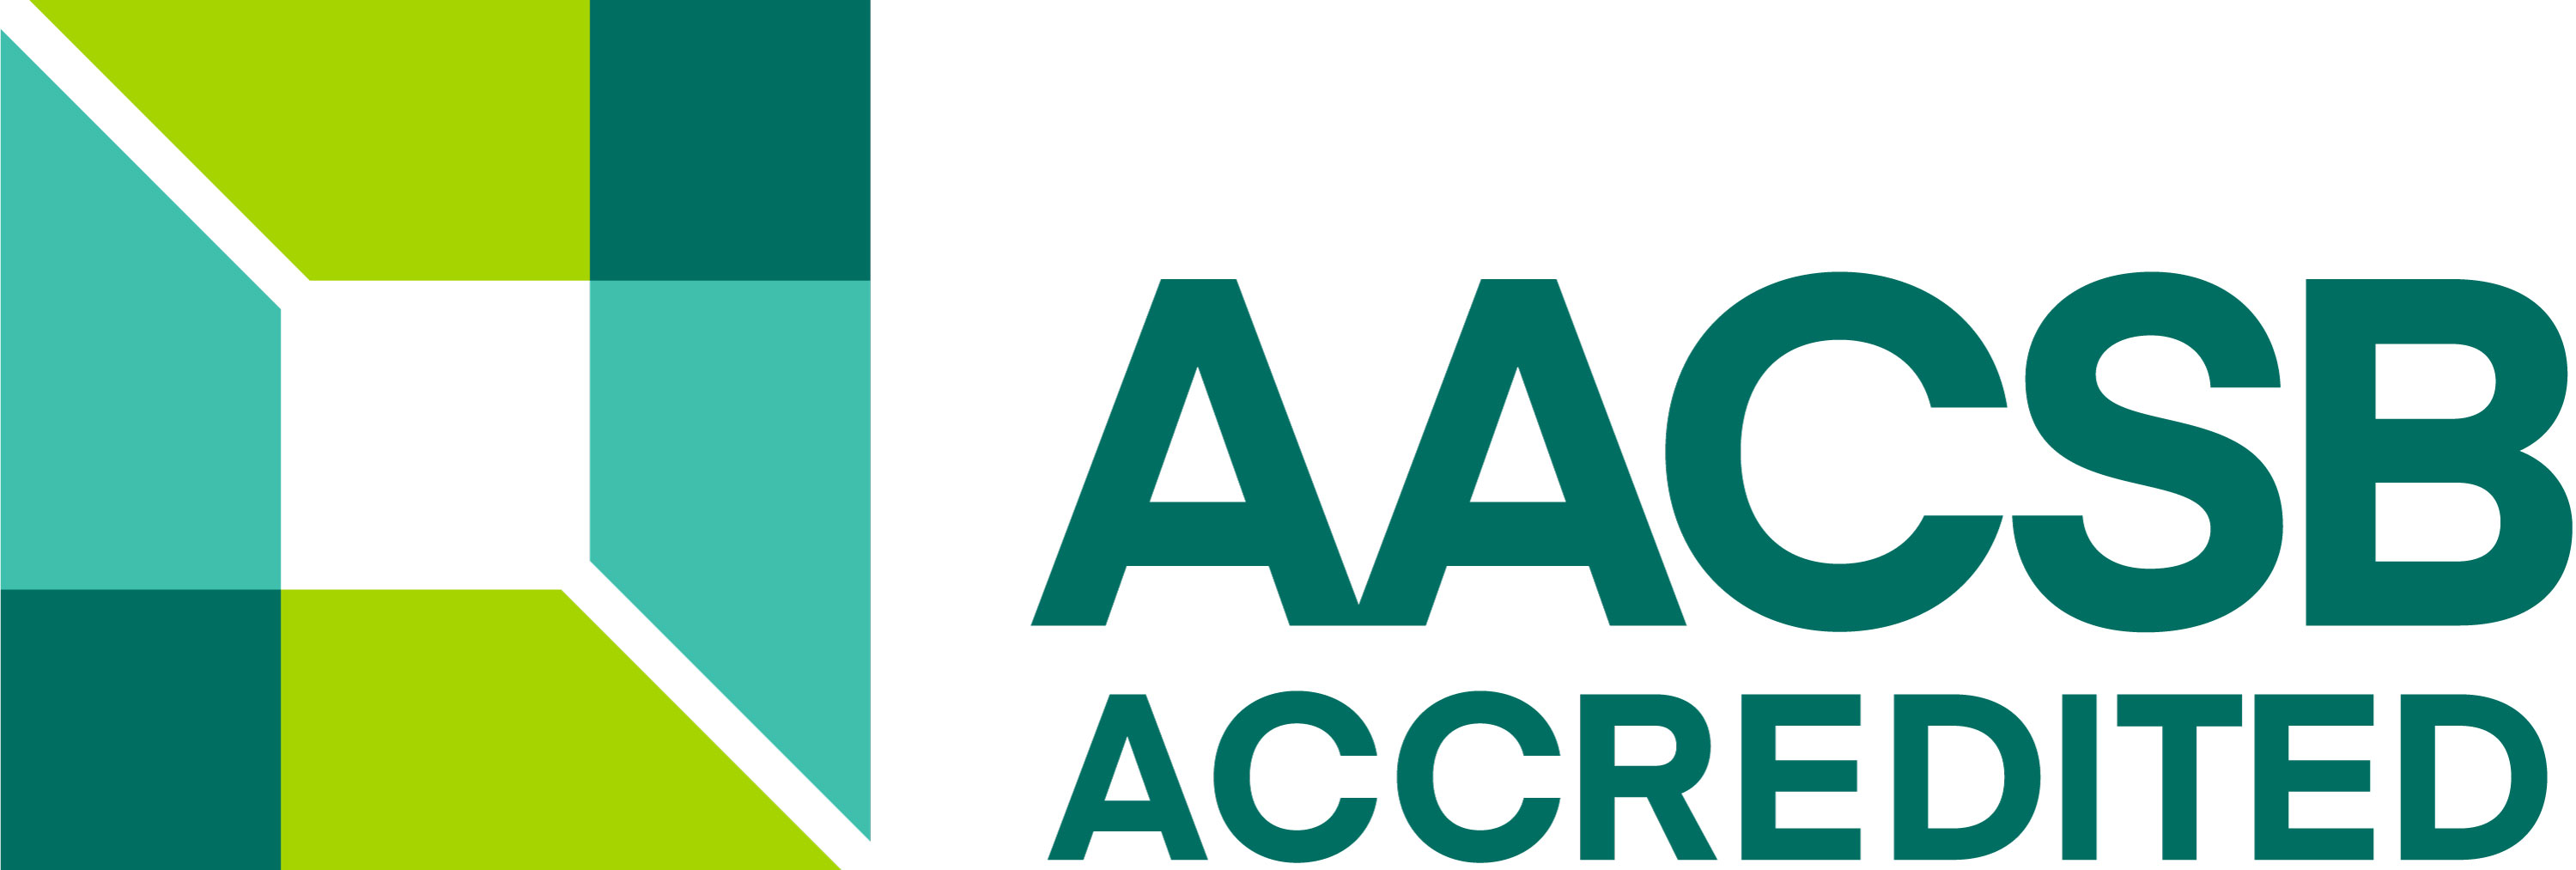 AACSB accredited business program